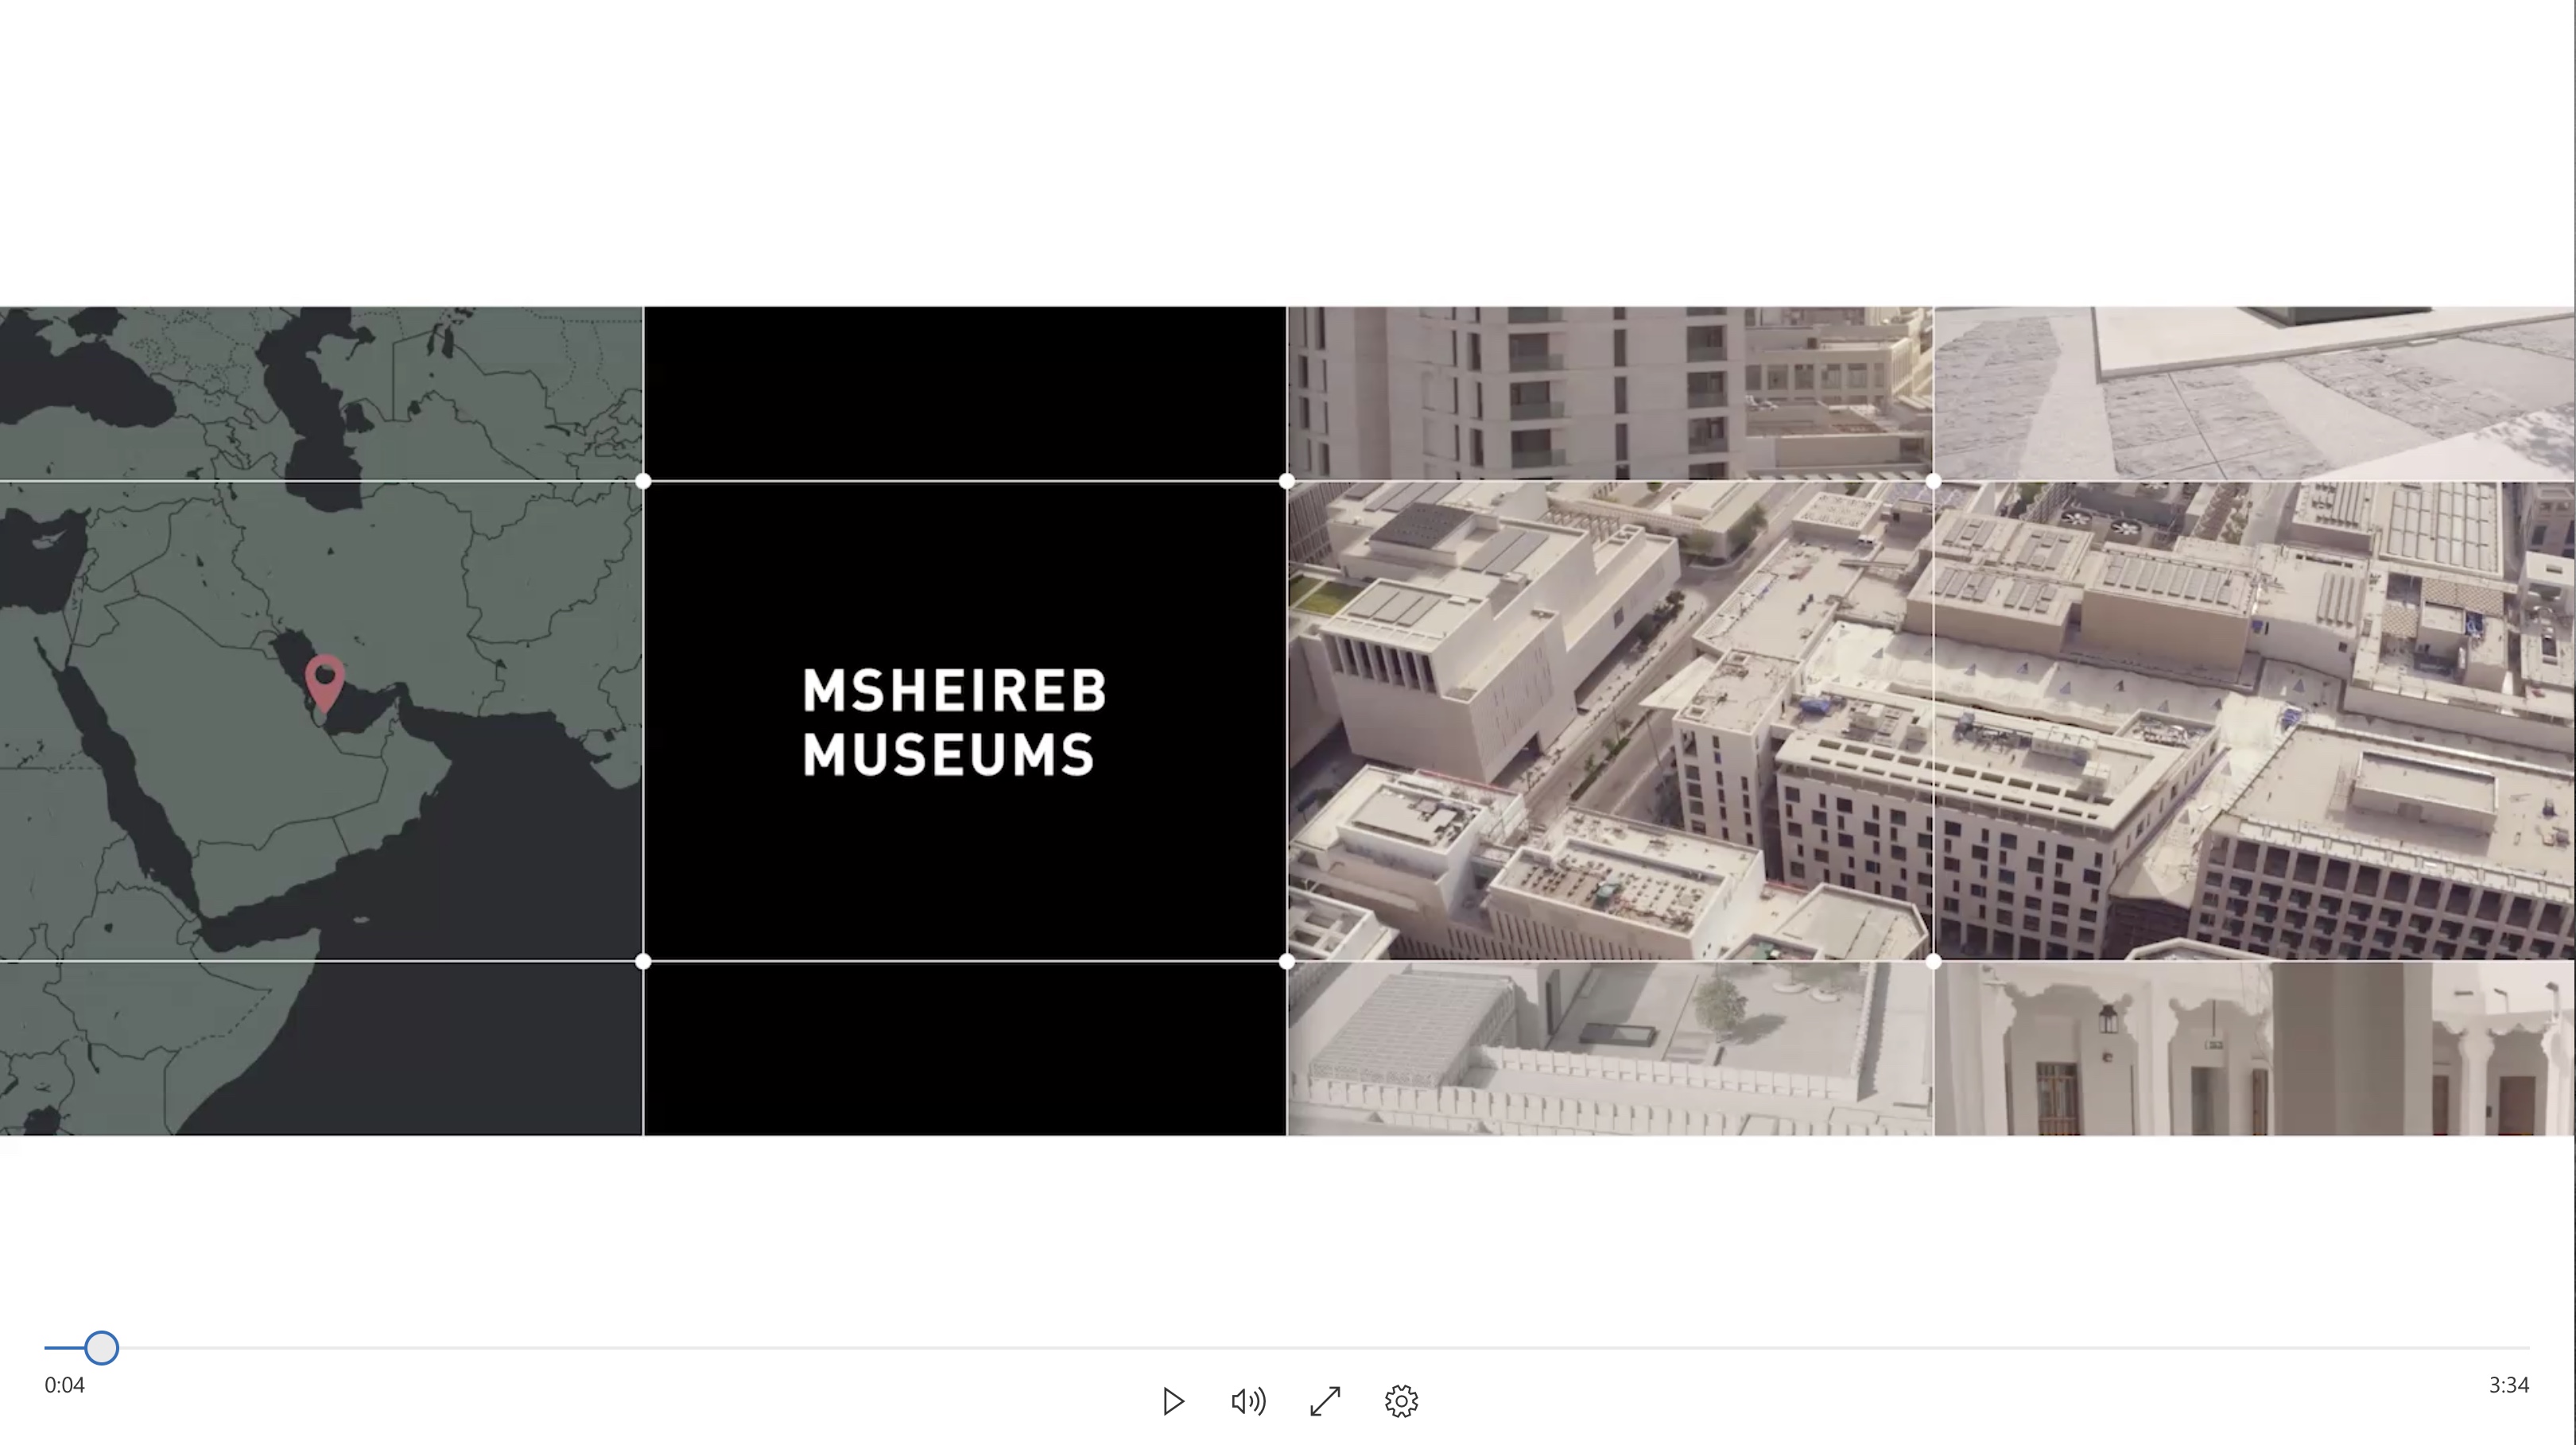 Video Introduction to Msheireb Museums